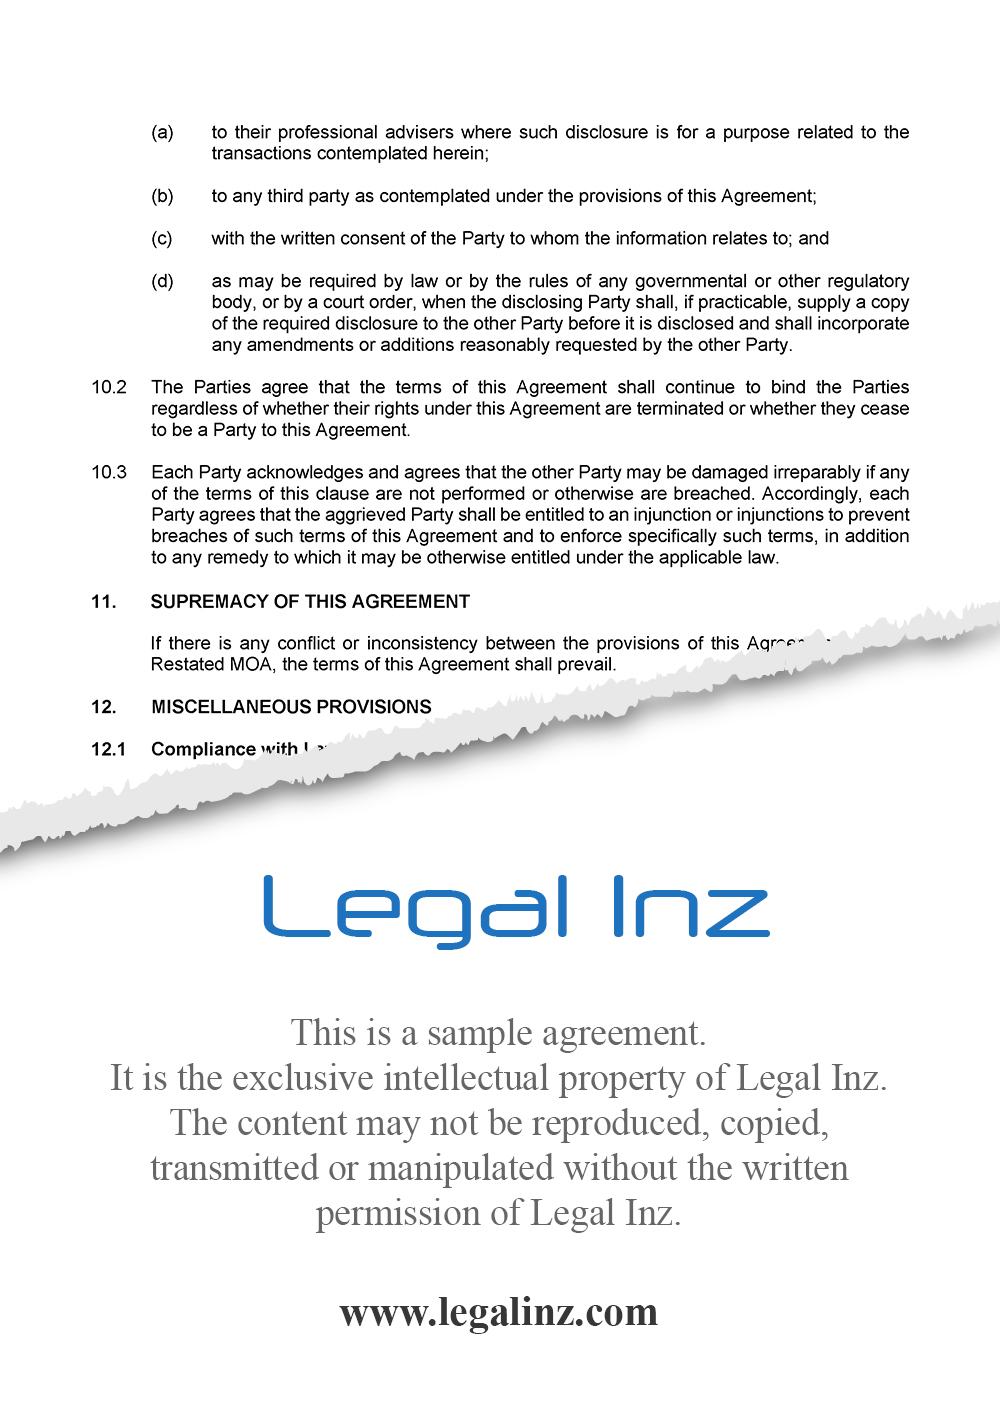 Share Purchase Agreement Sample 8